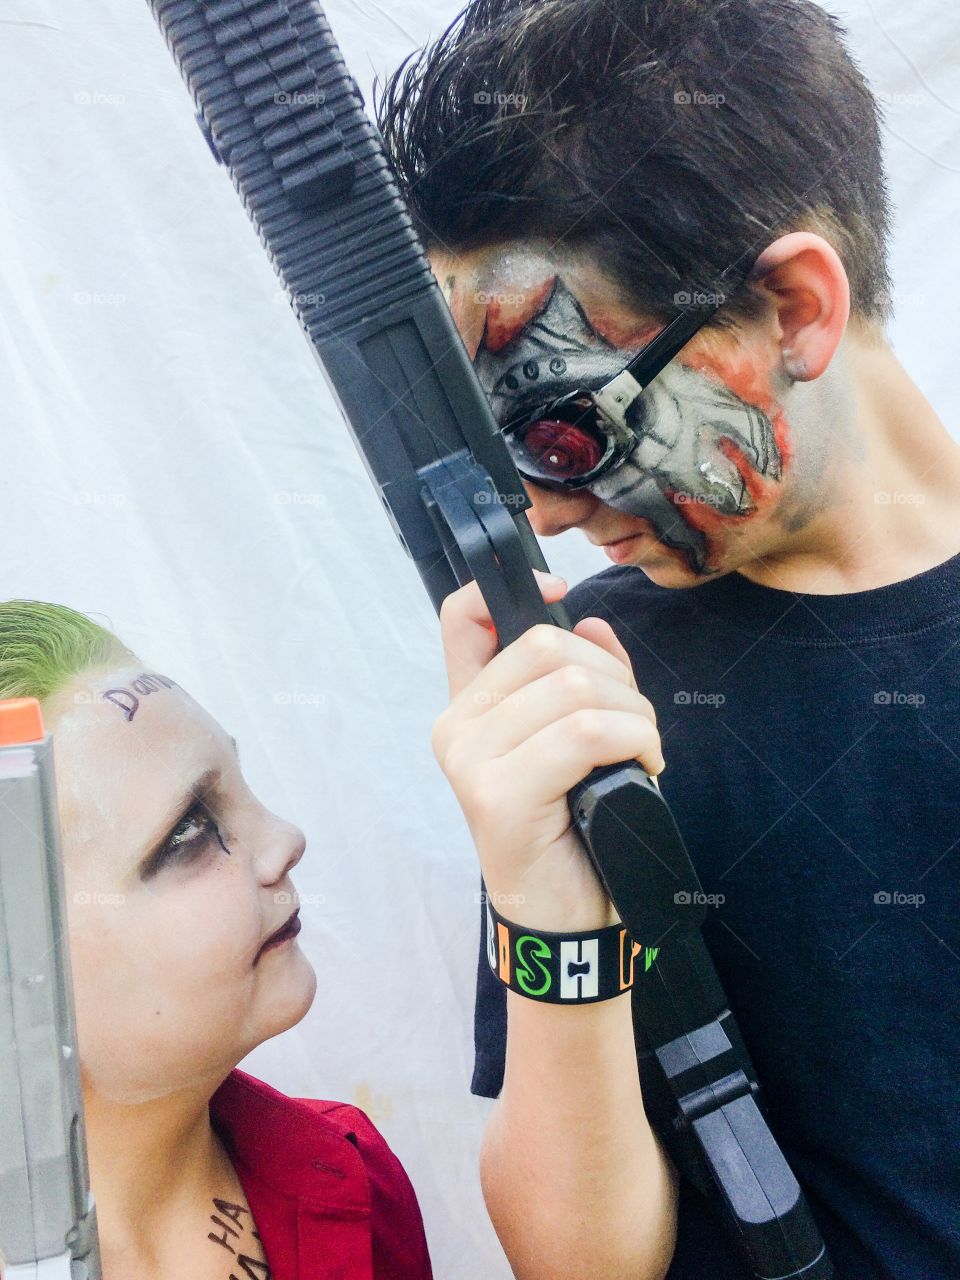 Man and woman with face paint holding gun in hand